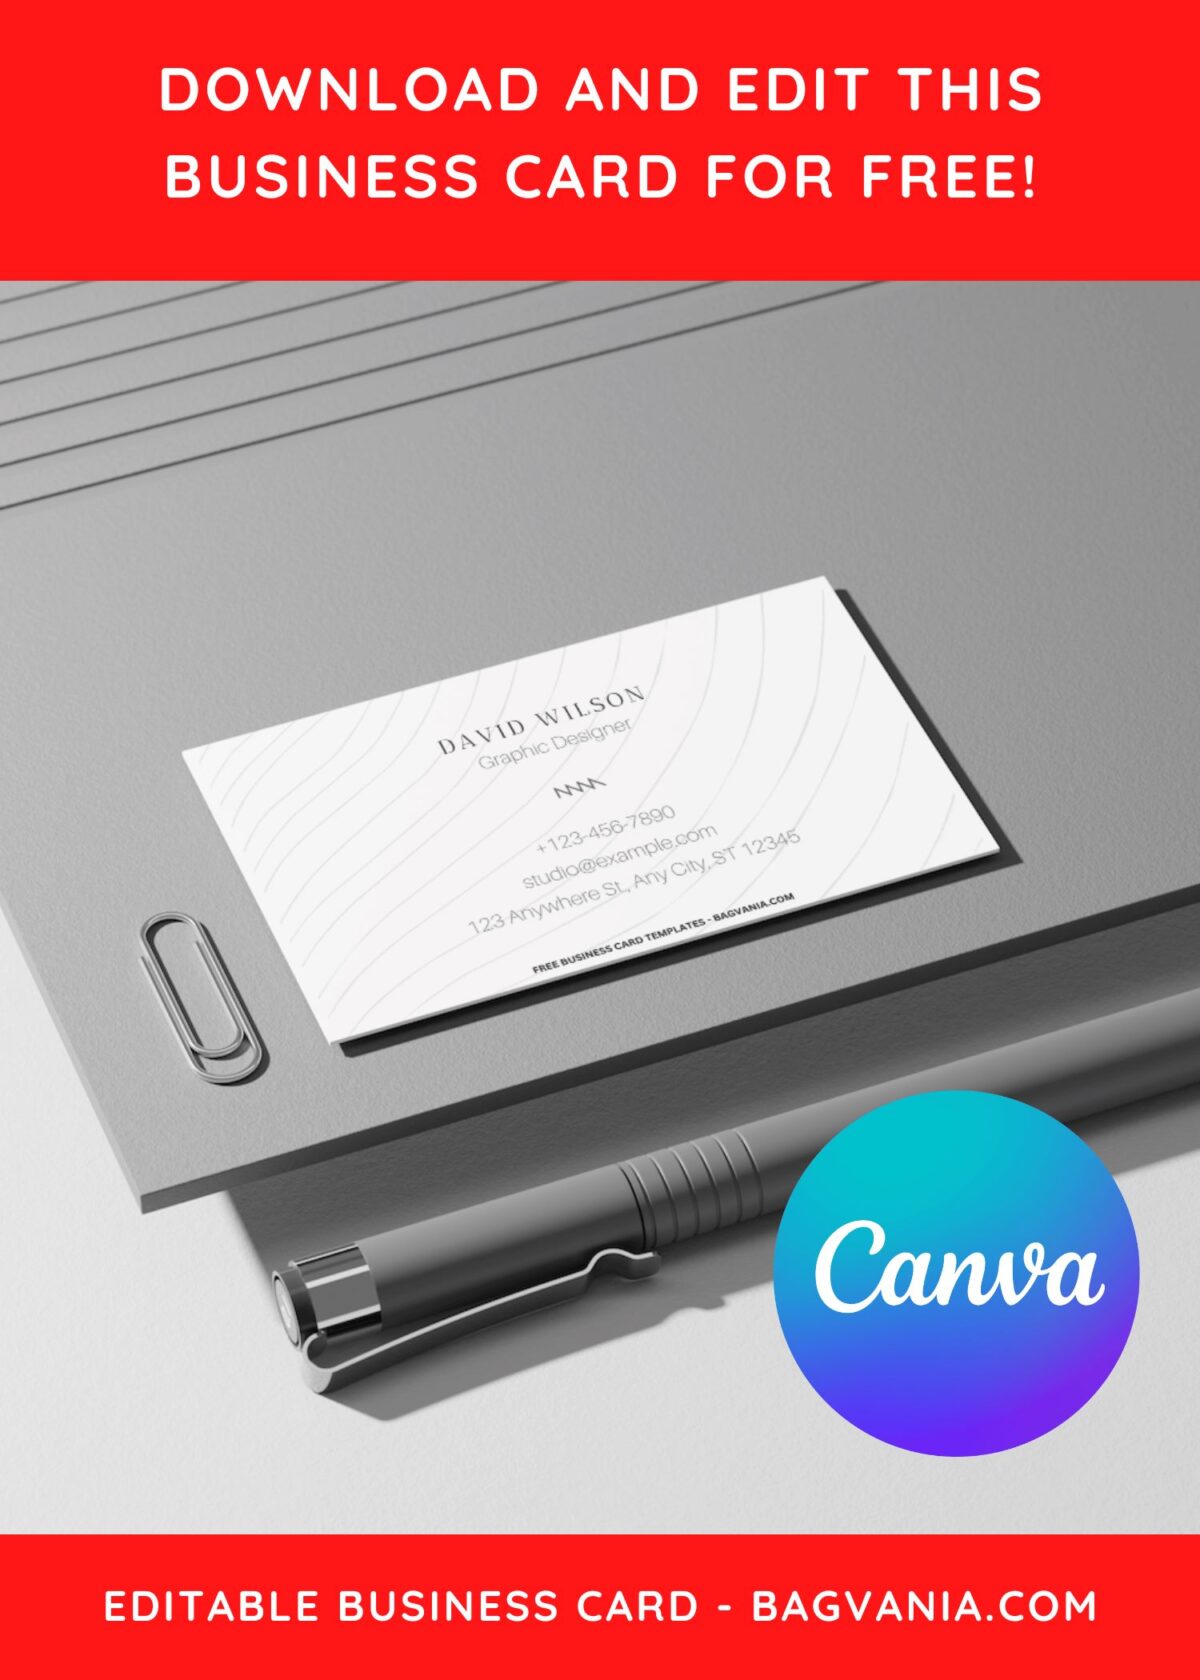 10+ Edgy Canva Business Card Templates J